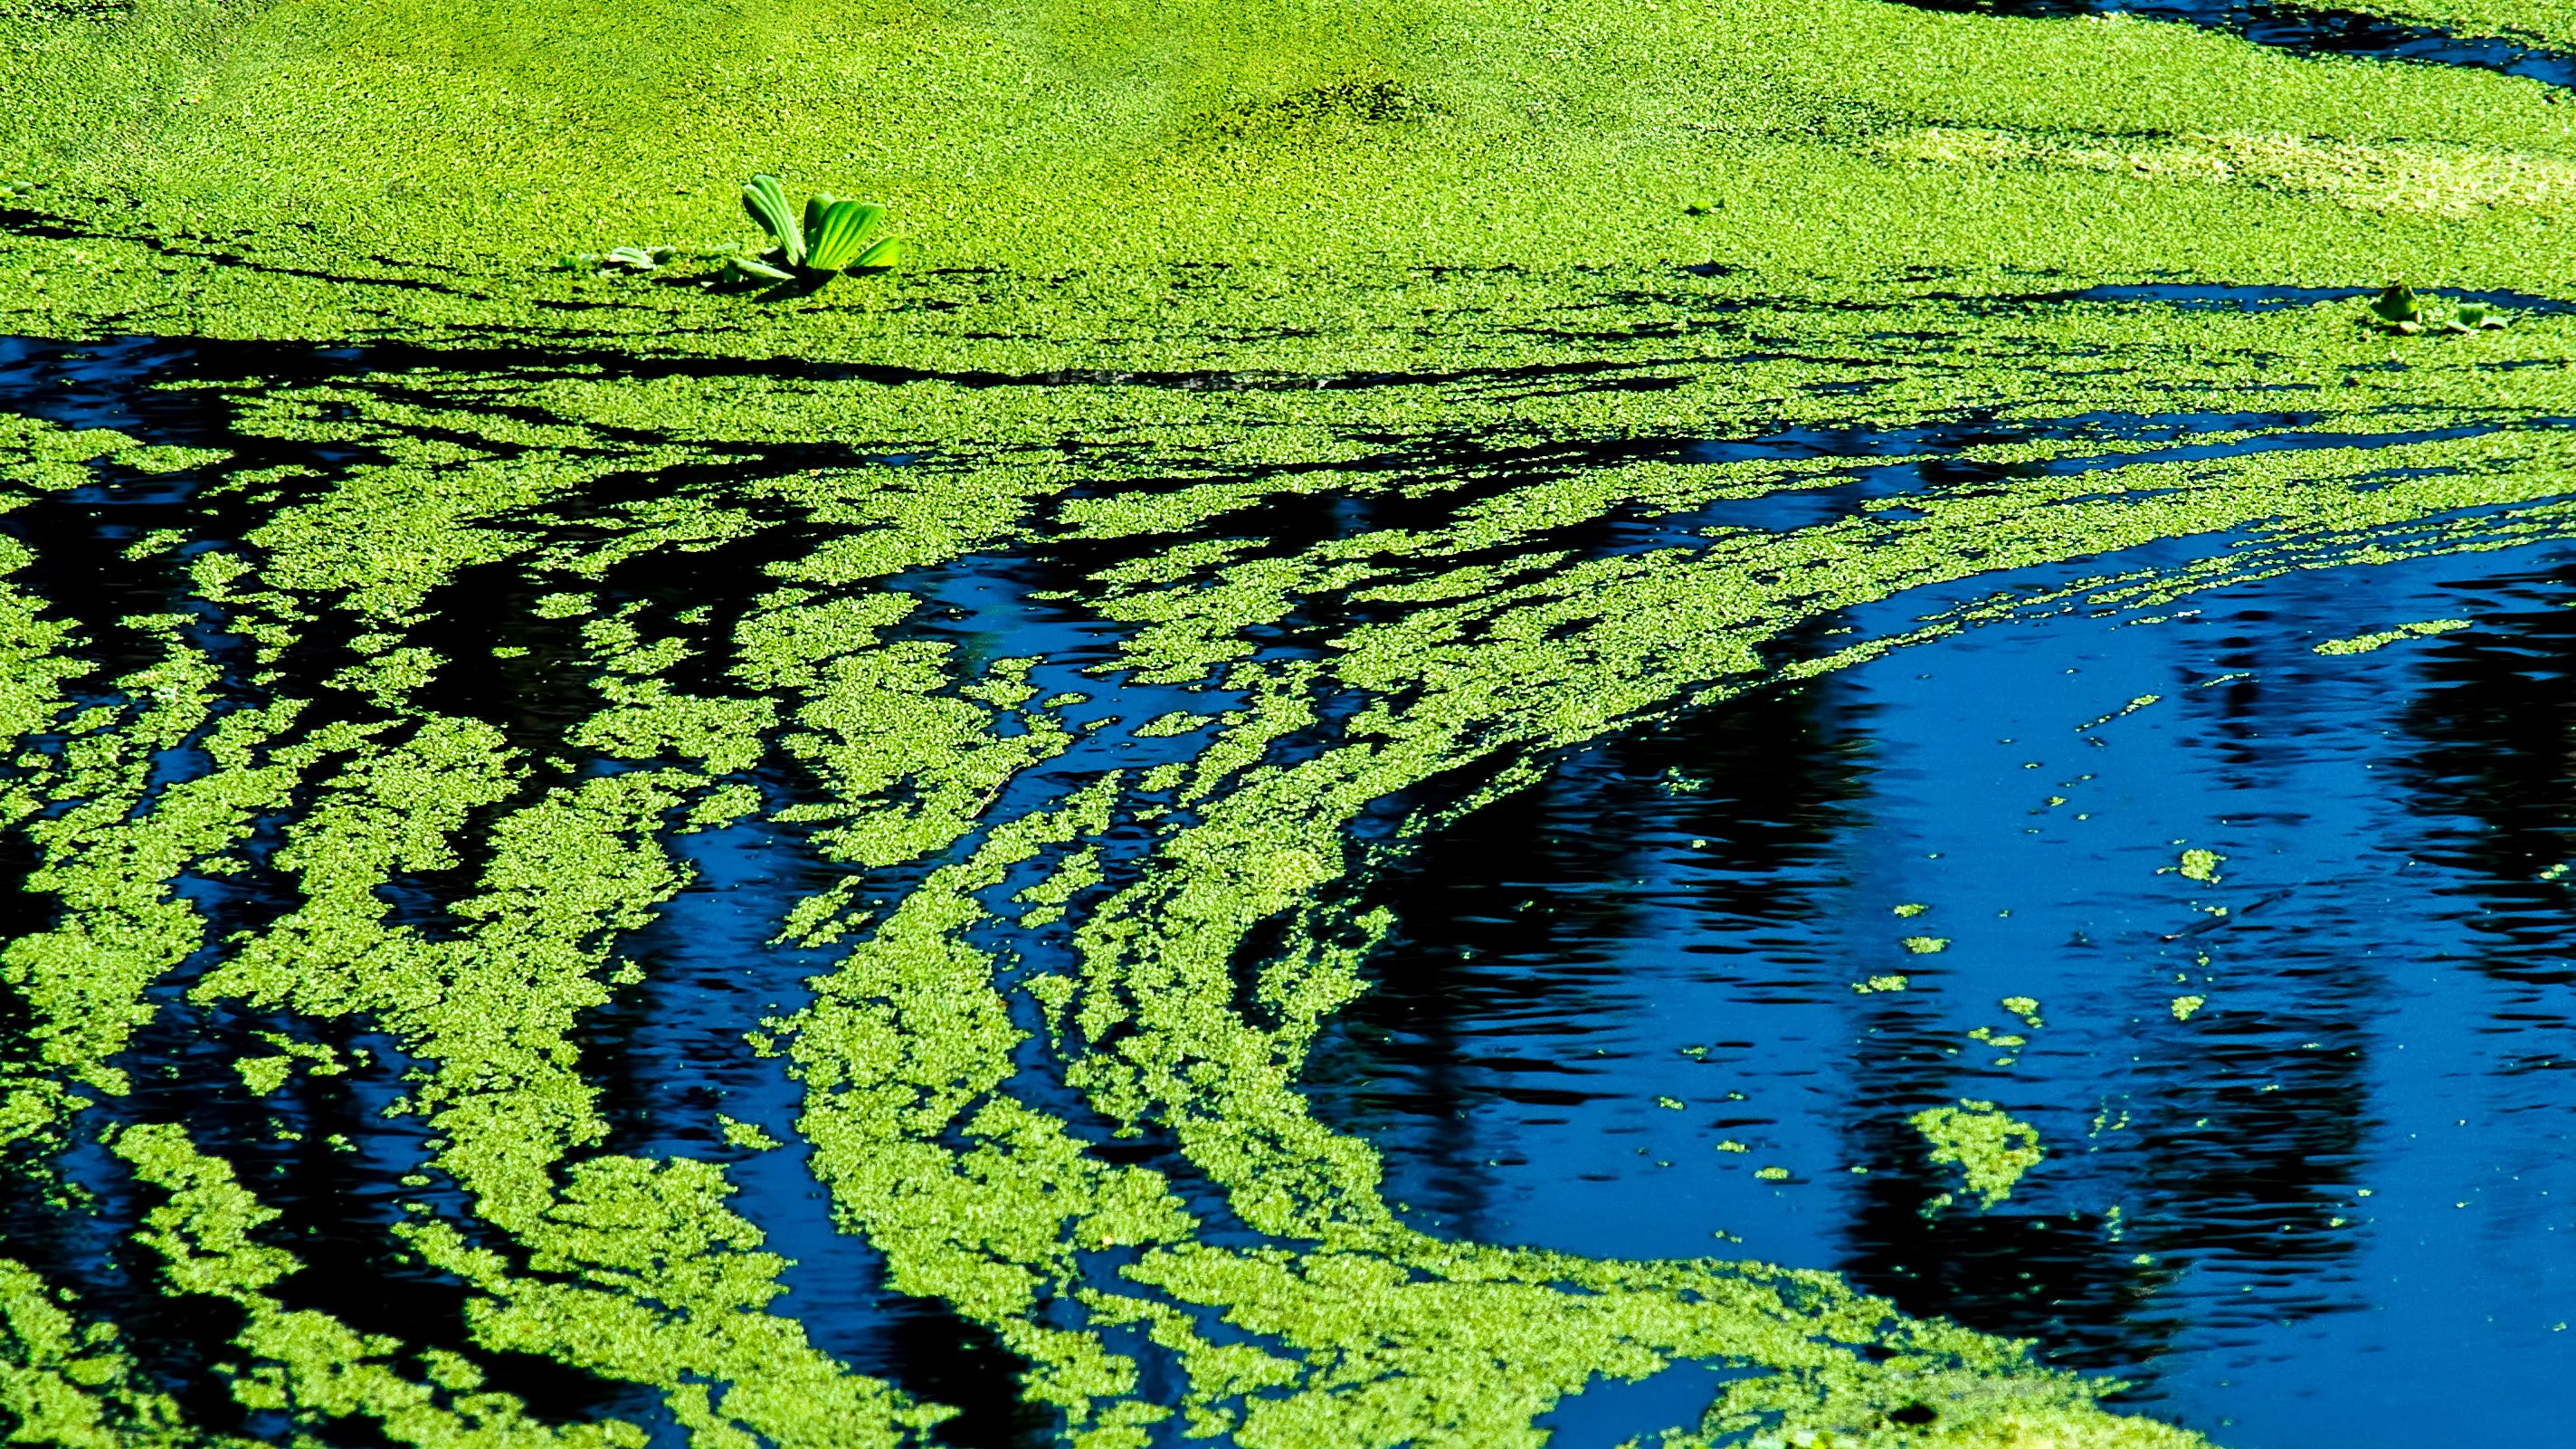 Toxic algae blooms in California can be deadly, health officials warn